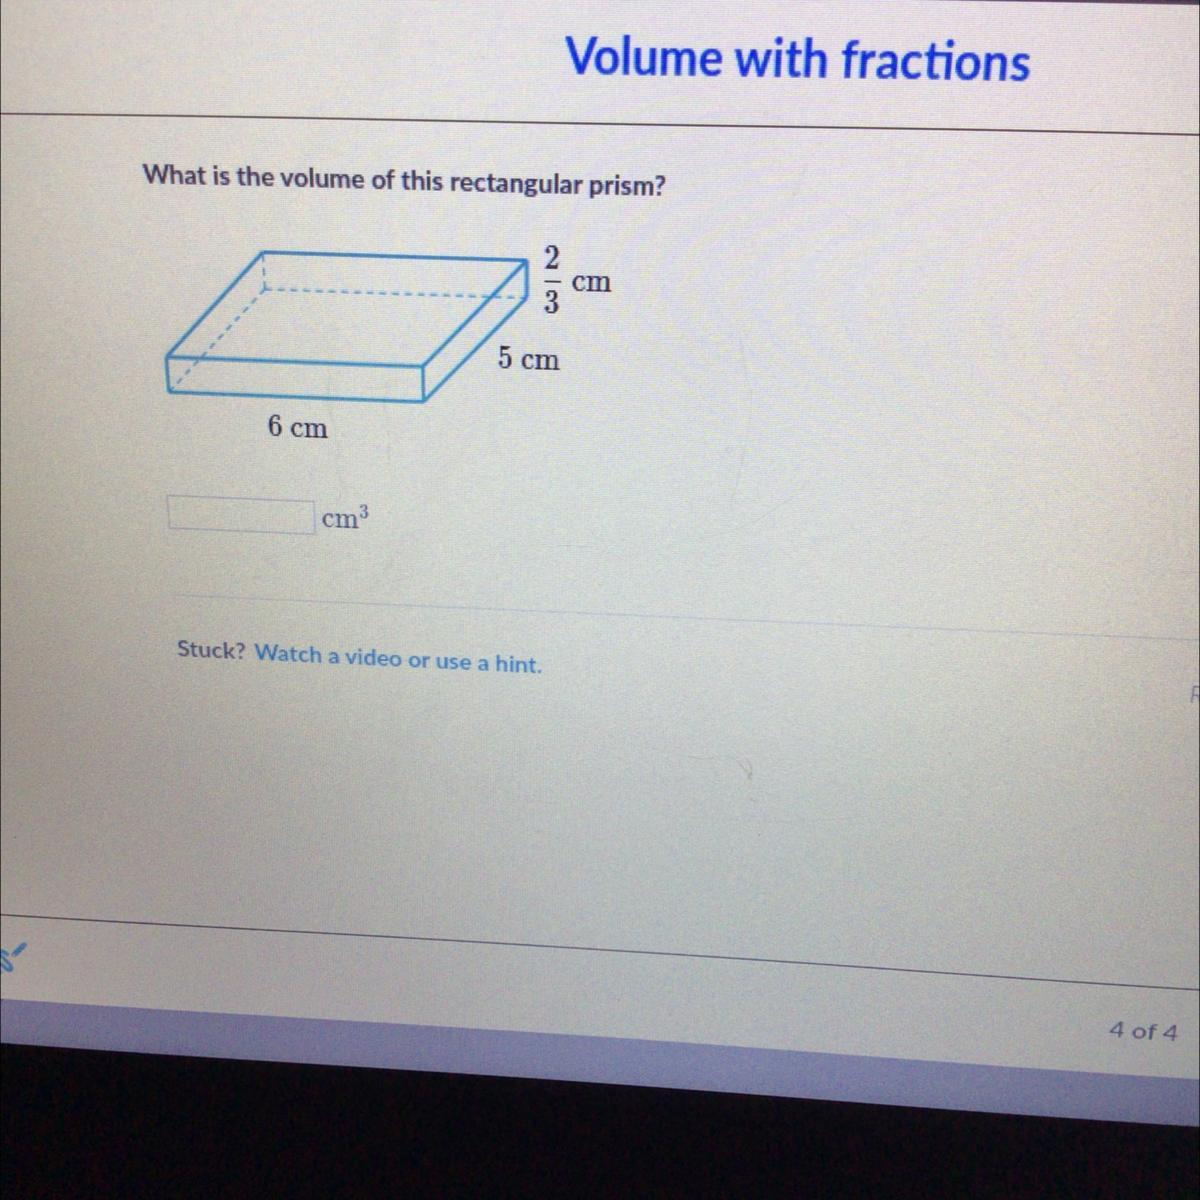 What Is The Volume Of This Rectangular Prism? 